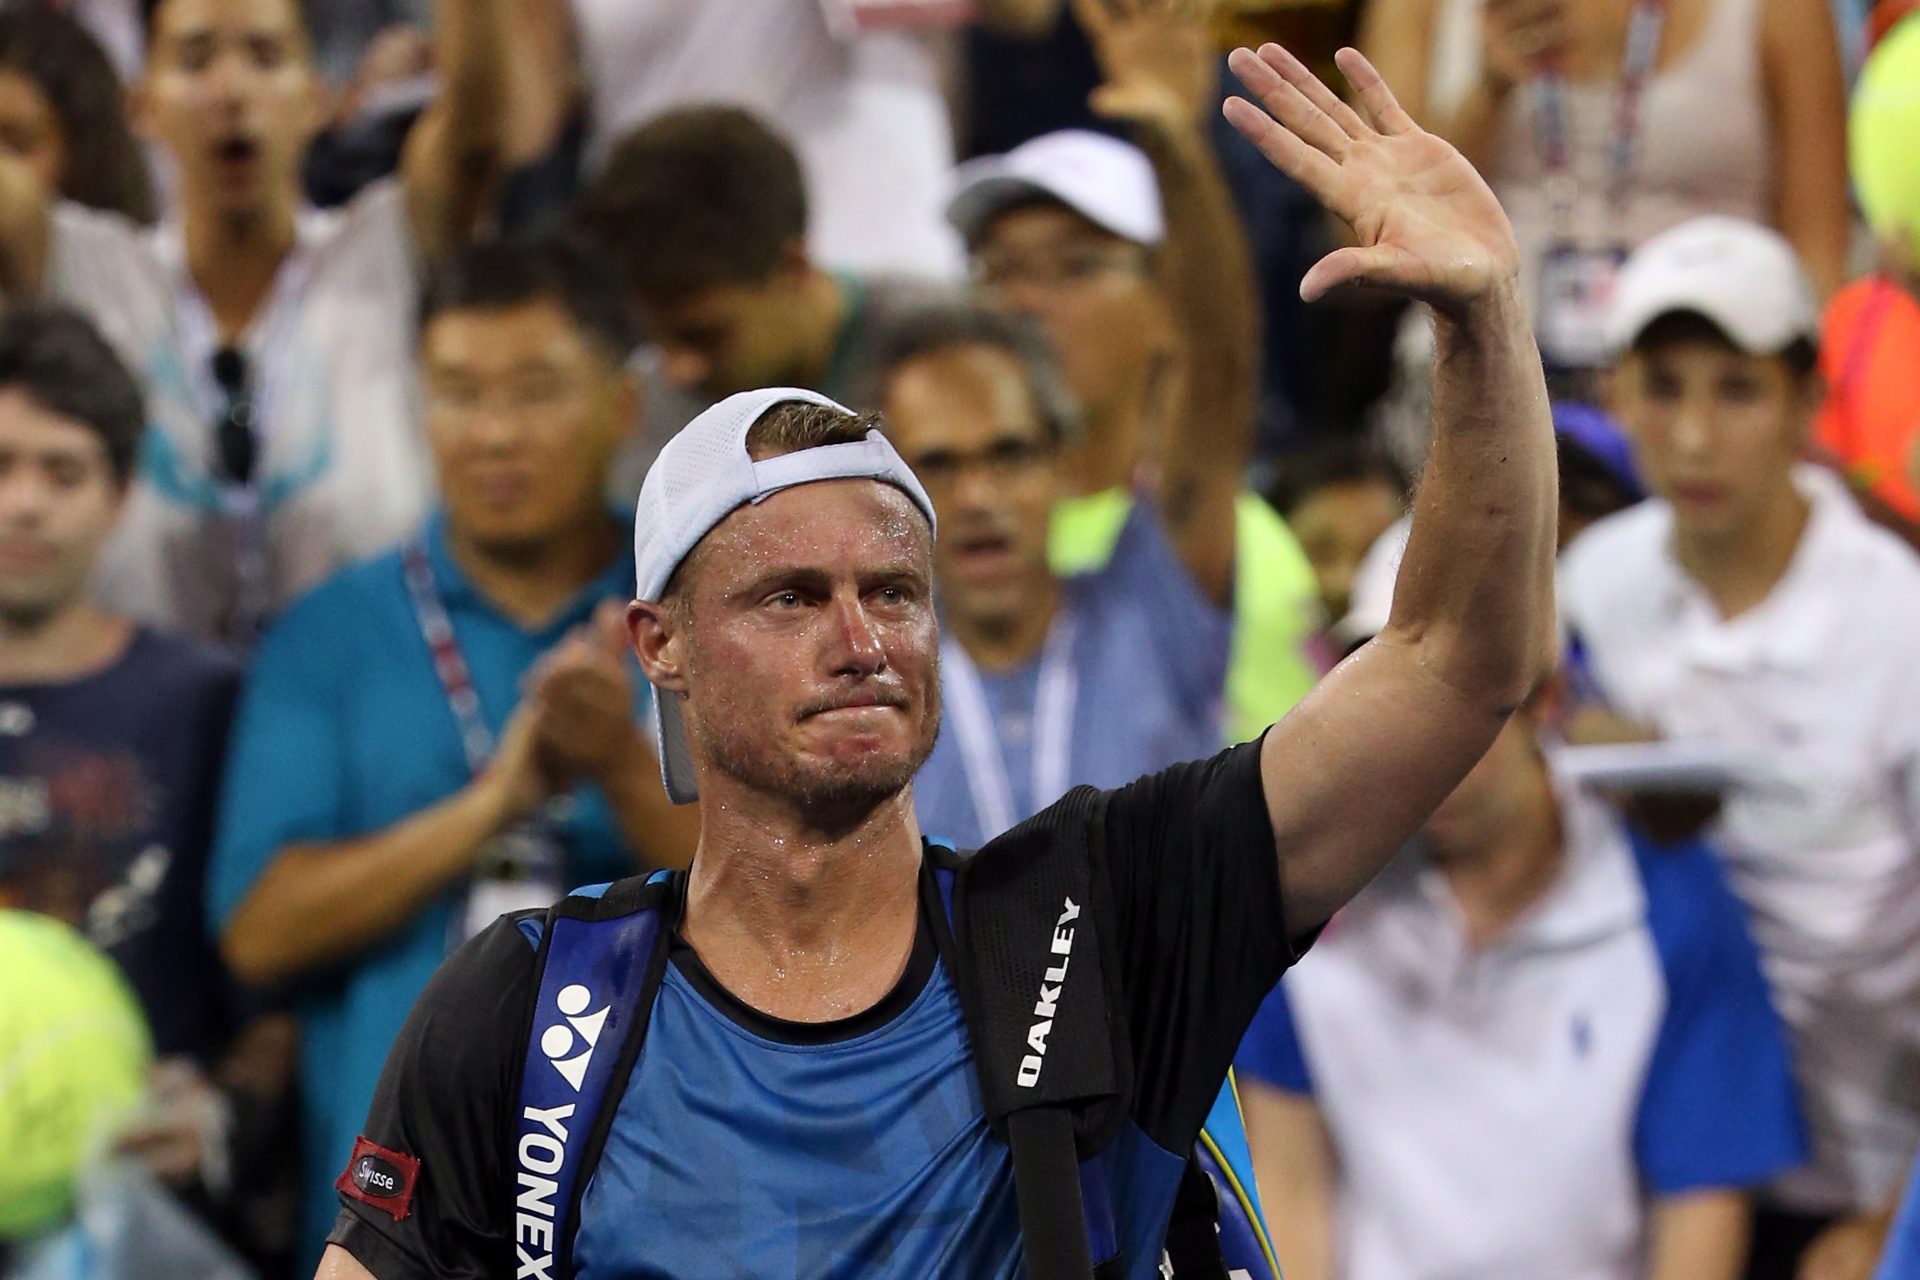 10. Which former Australian Open champion did Lleyton Hewitt have a relationship with?